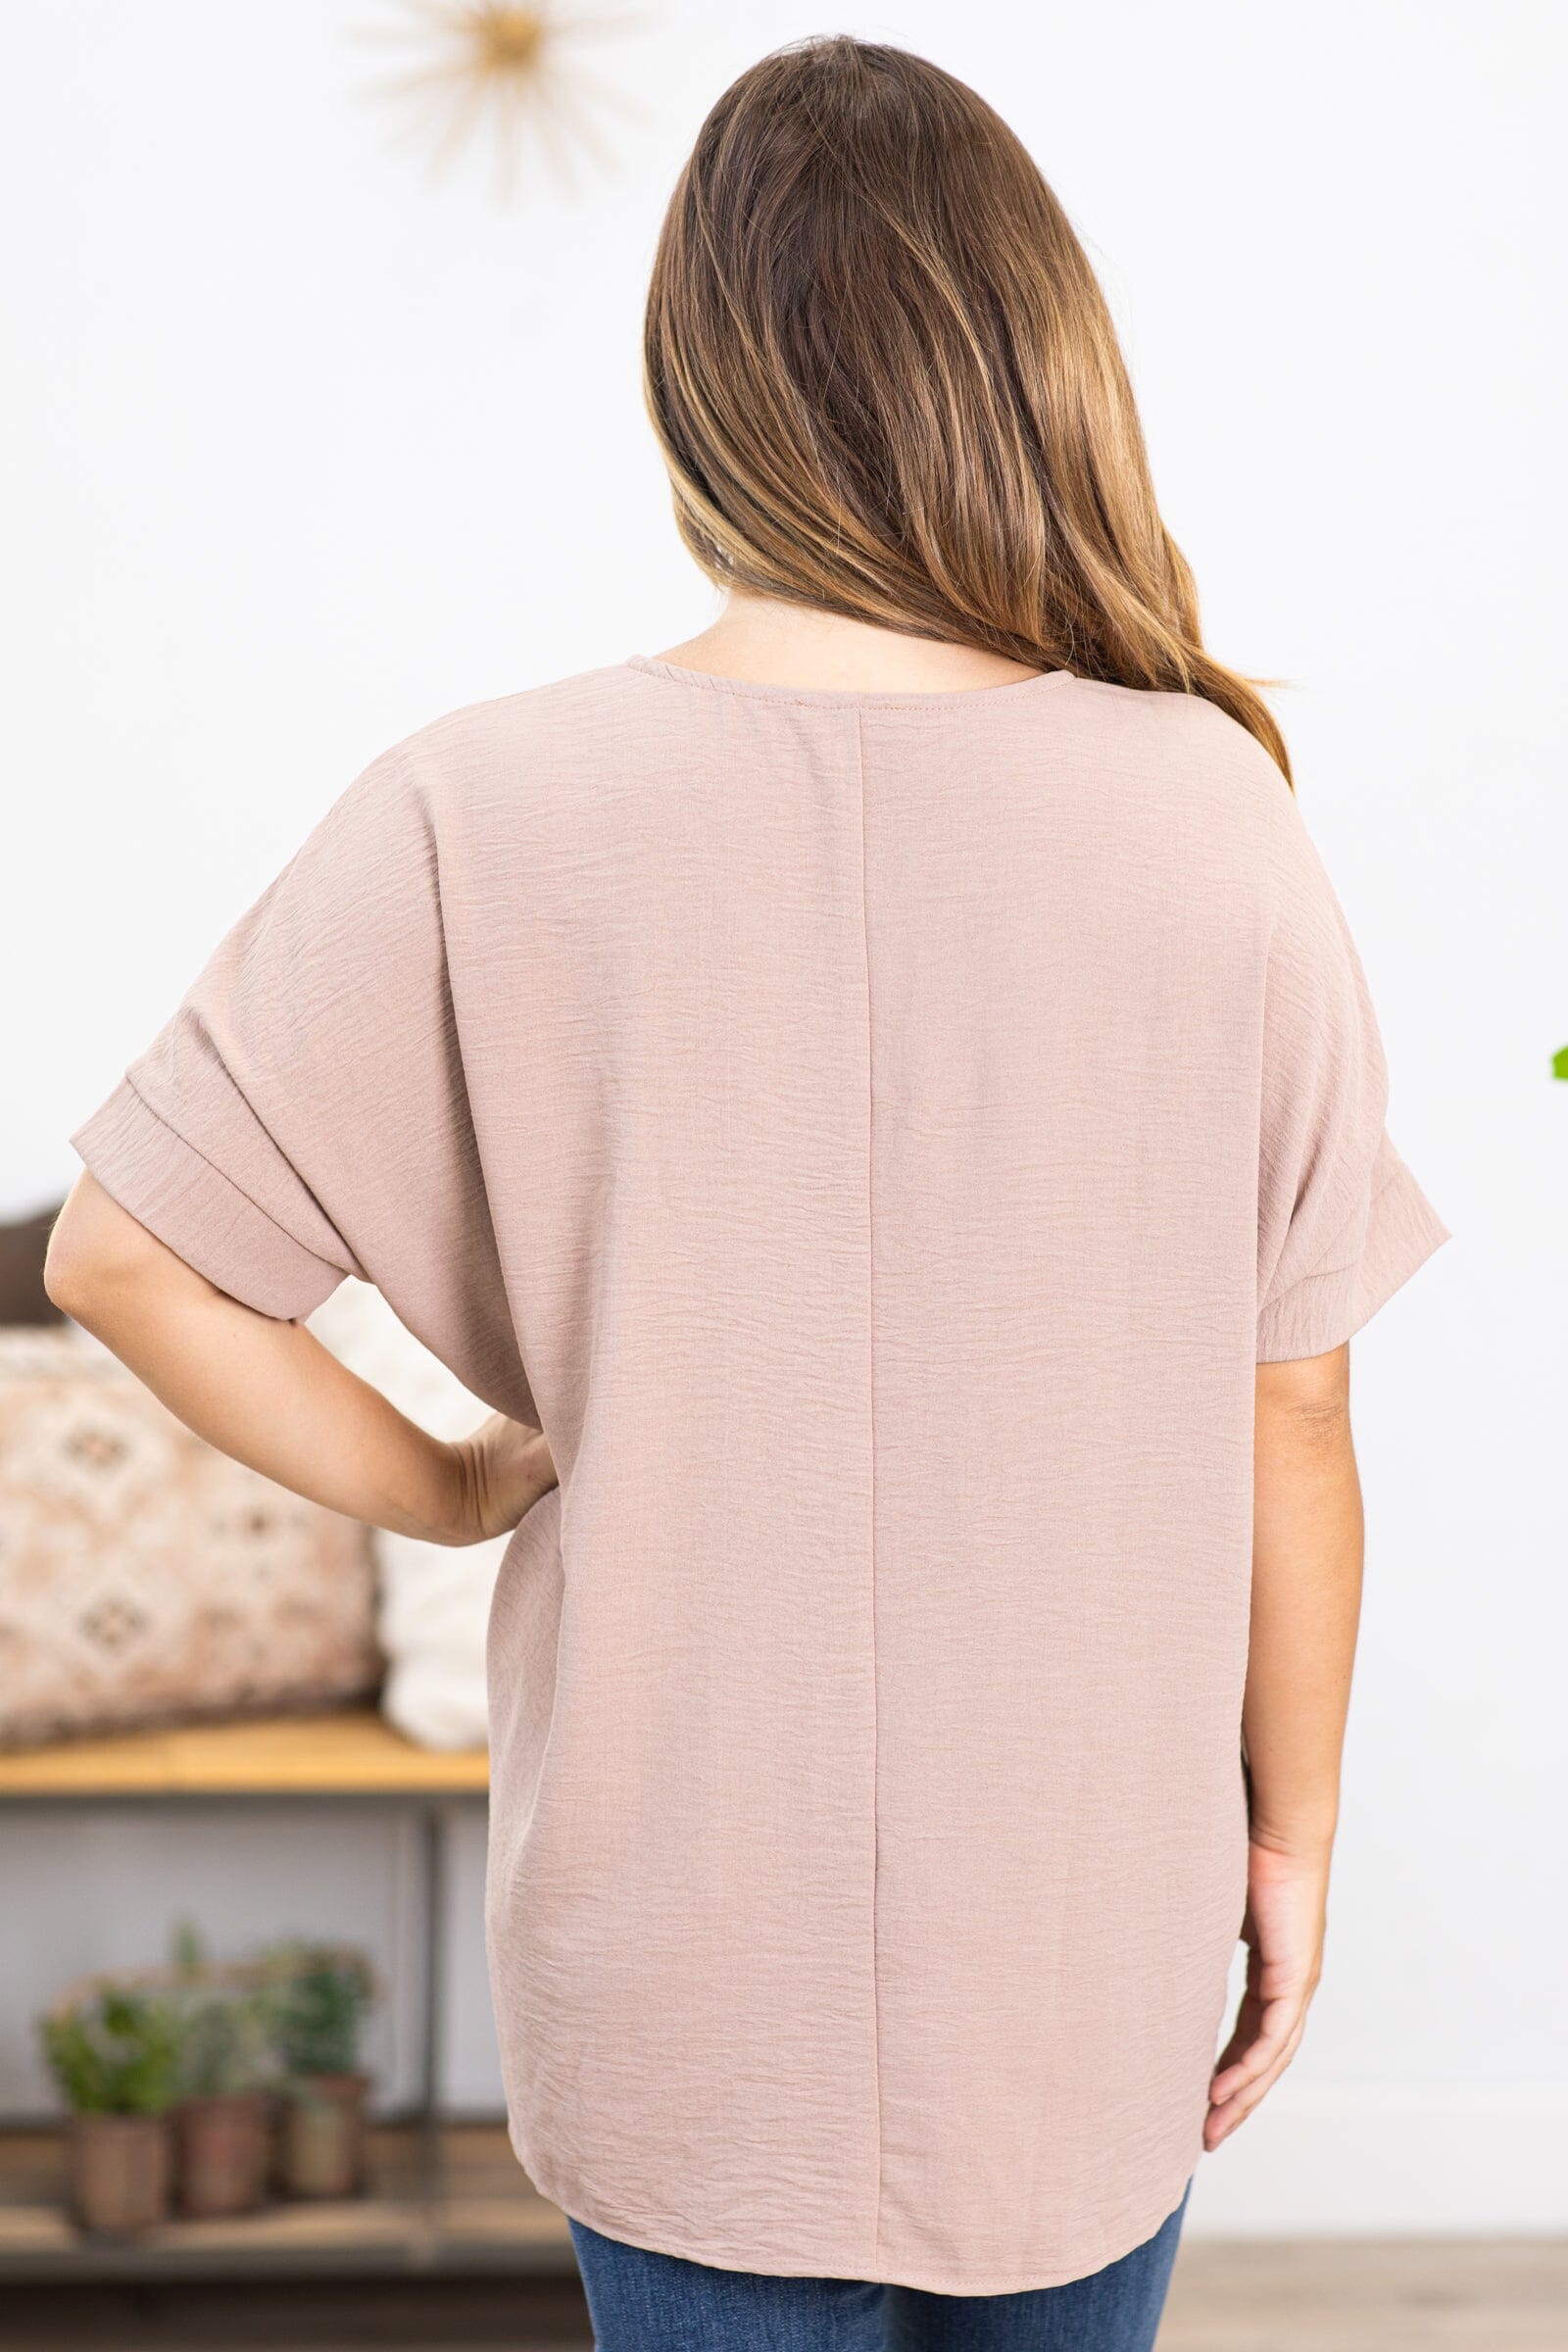 Taupe Airflow V-Neck Top - Filly Flair